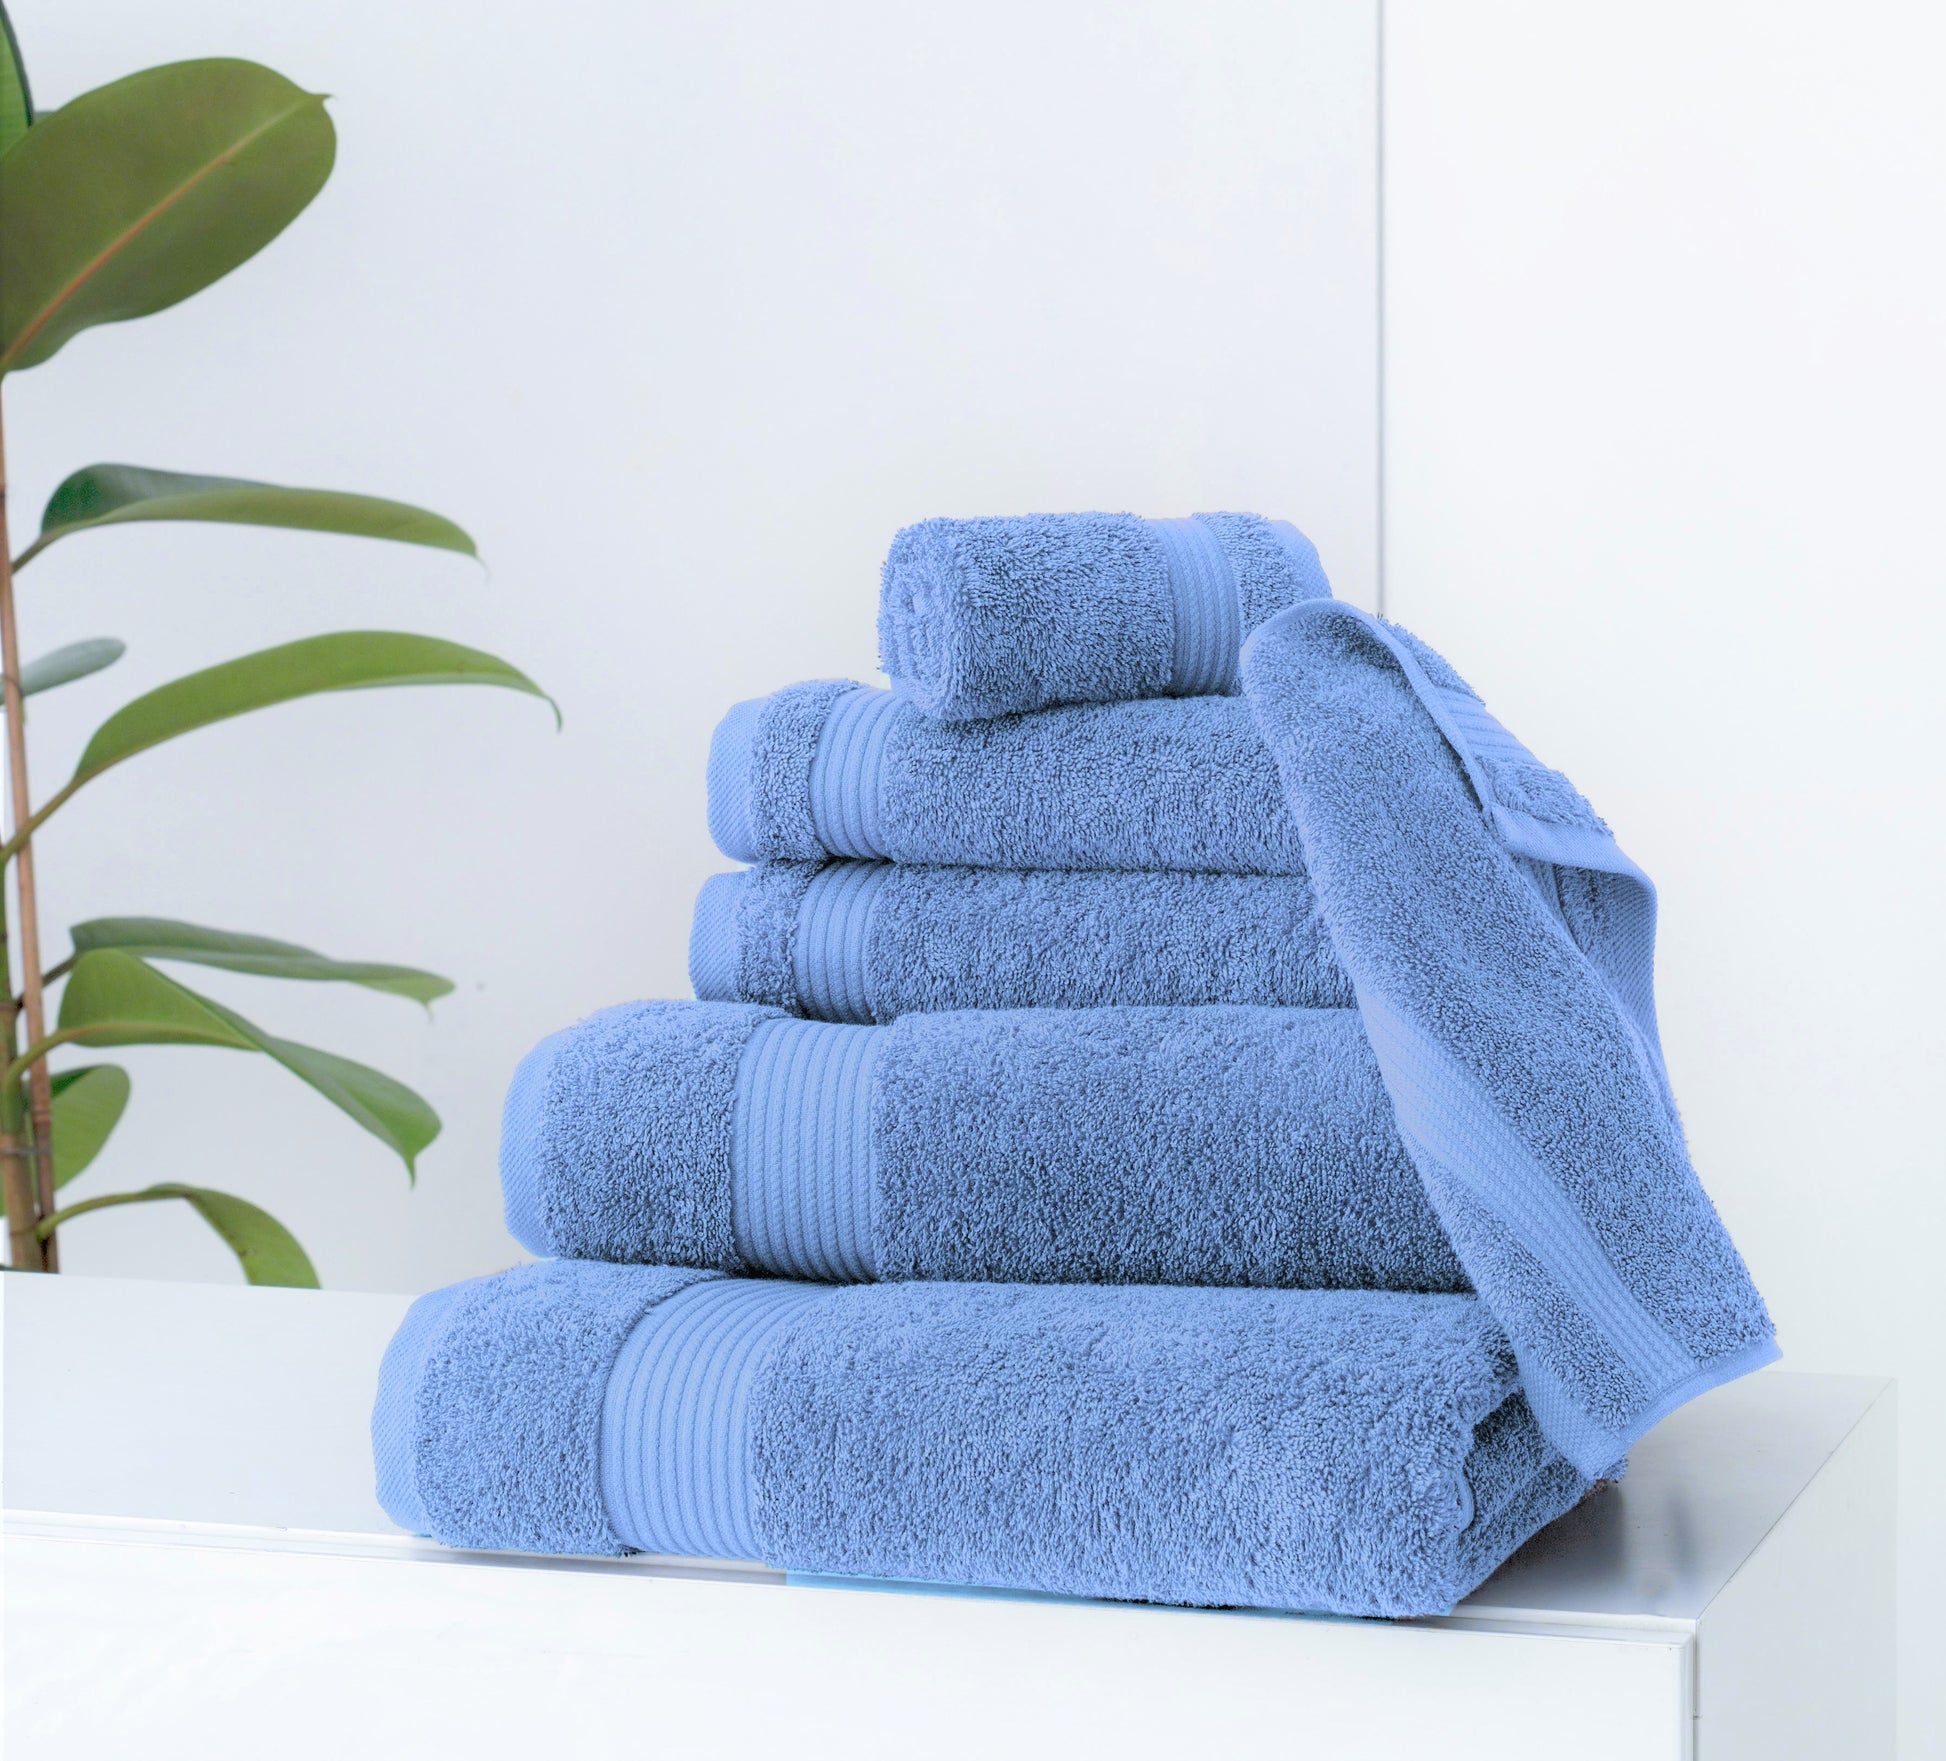 Classic Turkish Towels - Premium Cotton Quick-Dry 9 PC Bath Towel and Bath  Mat Set - Soft, Lightweight, Bathroom Towels Made with 100% Turkish Cotton